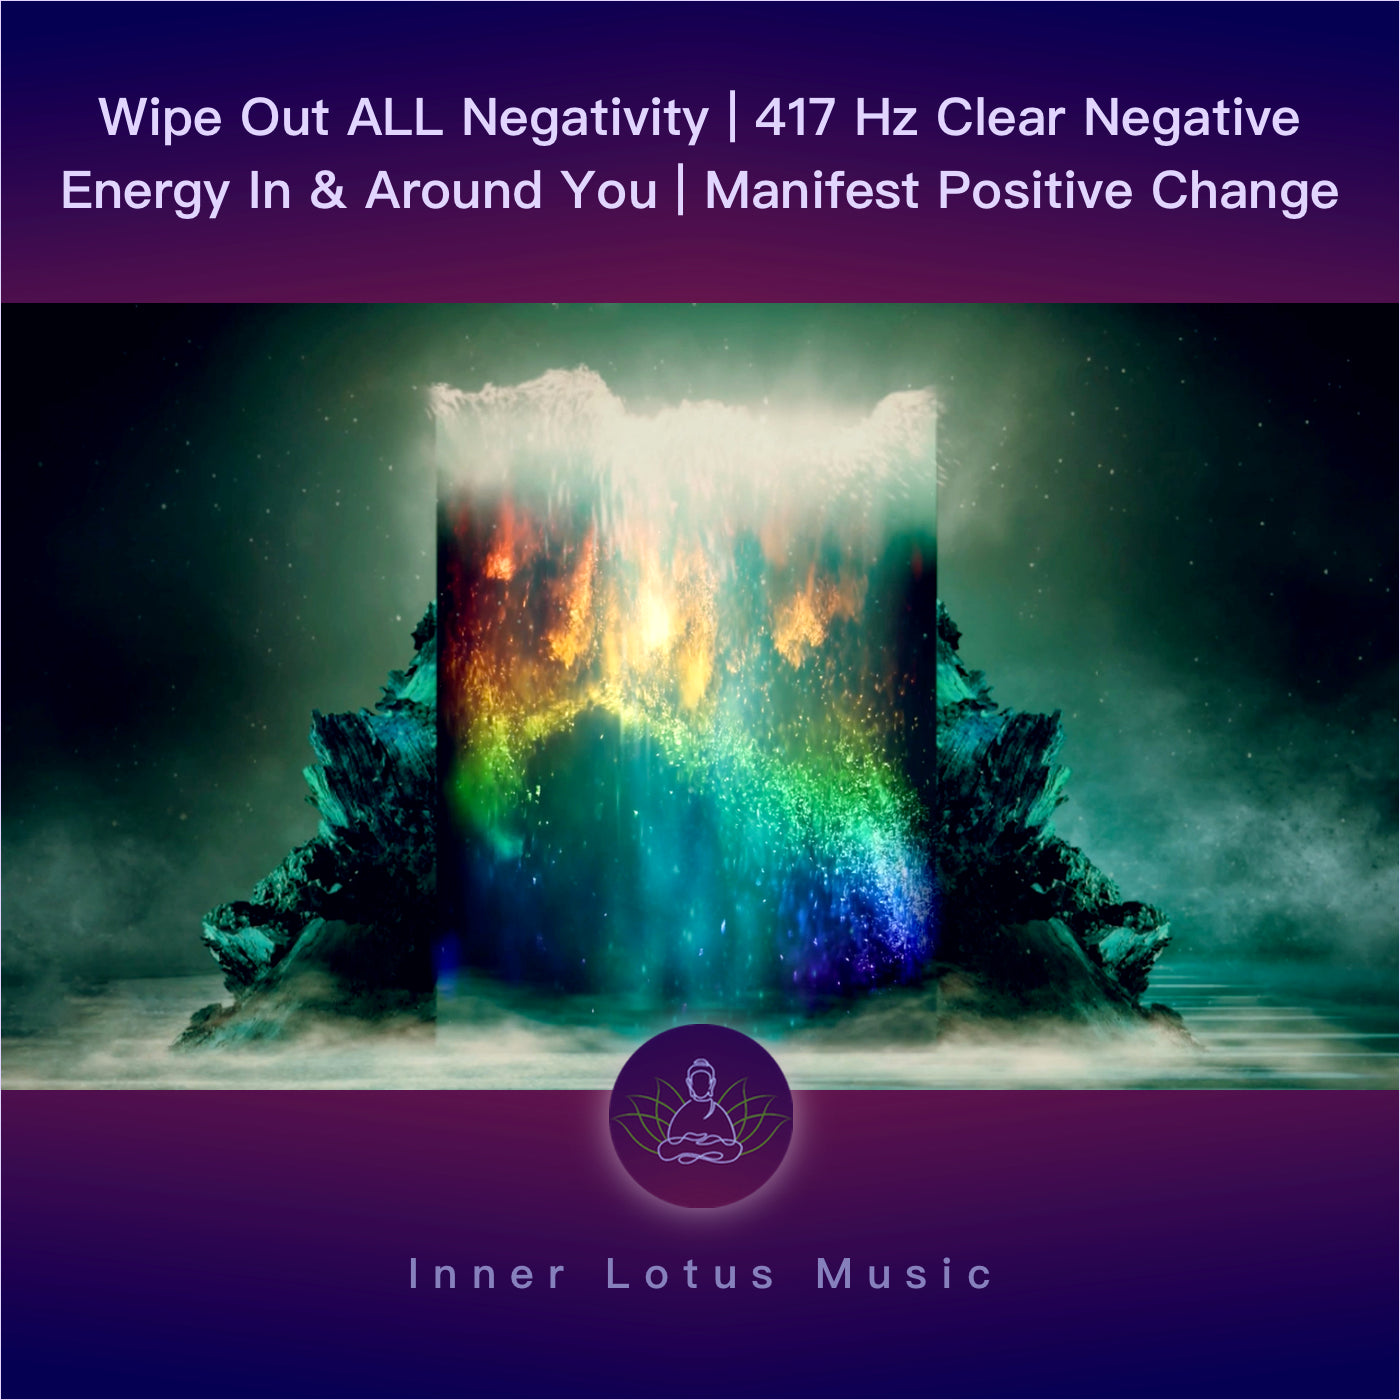 Wipe Out ALL Negativity | 417 Hz Clear Negative Energy In & Around You | Manifest Positive Change